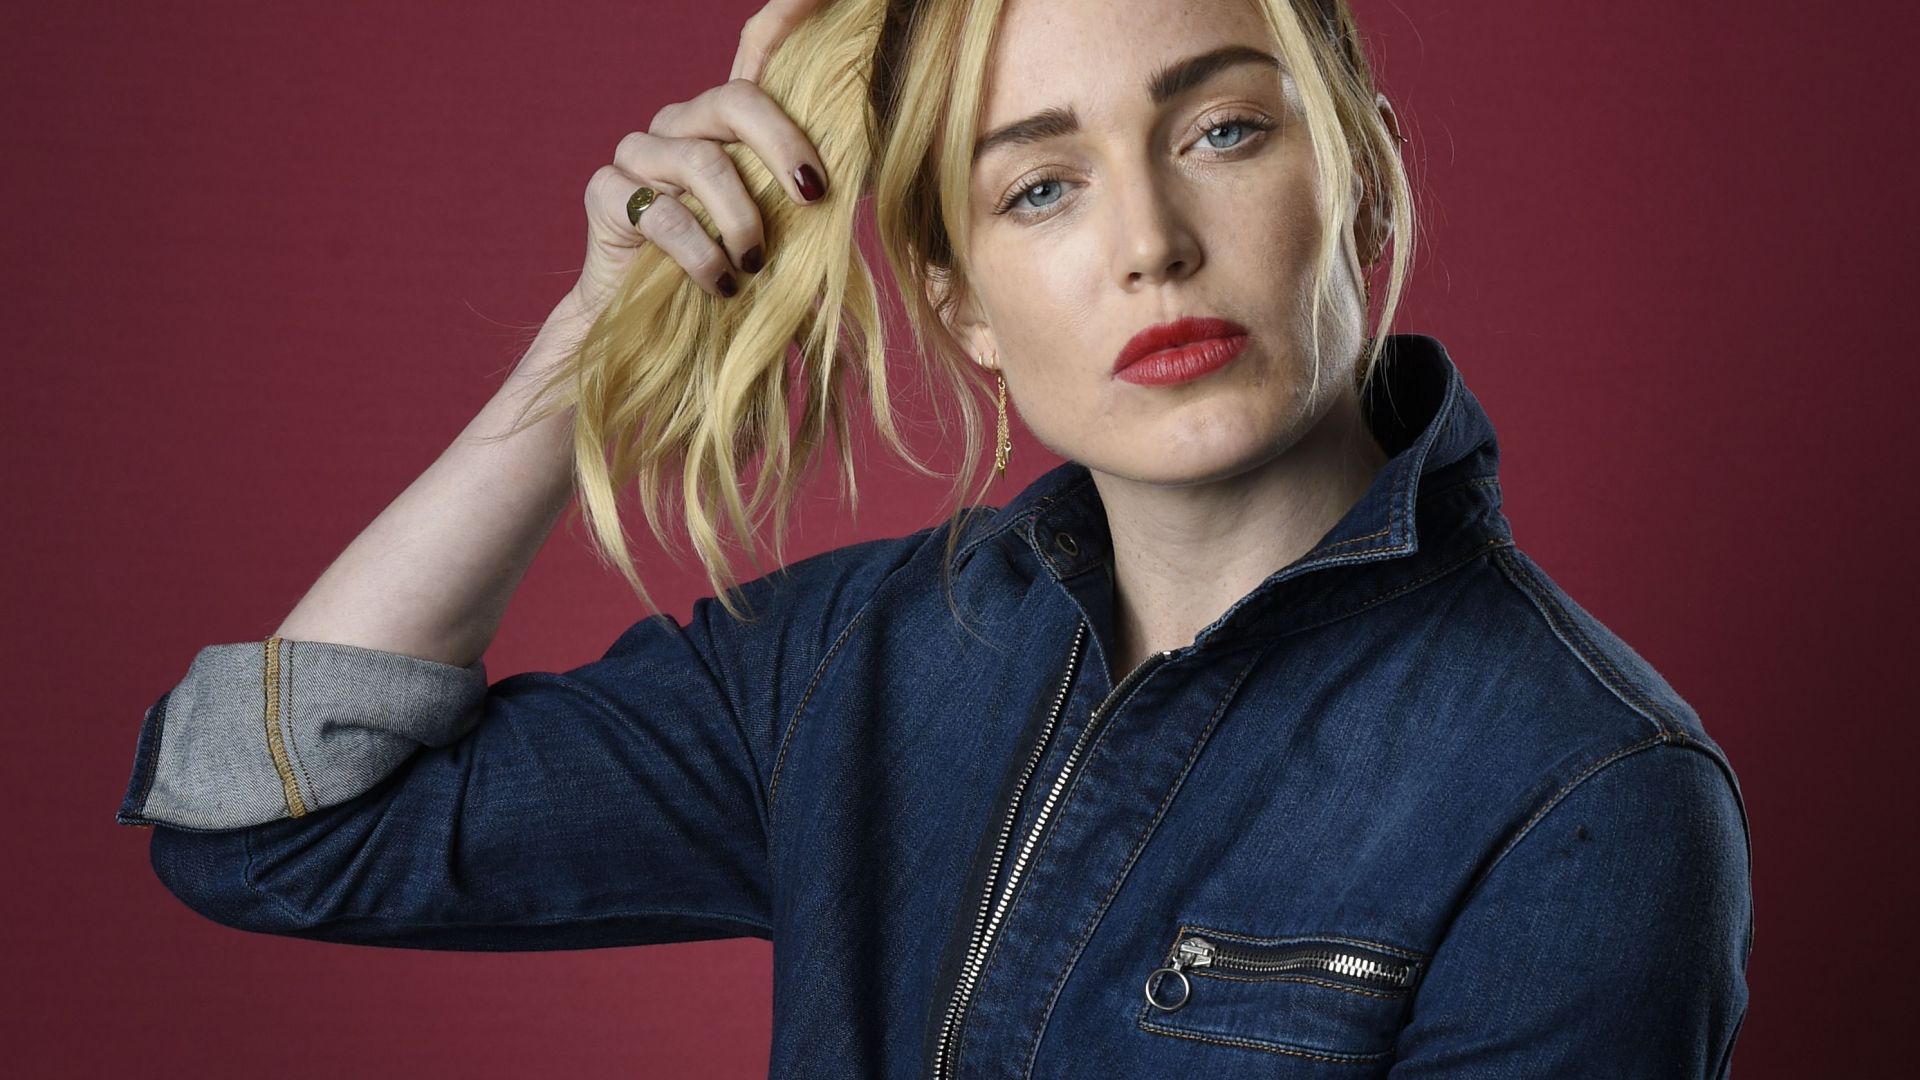 Wallpaper Caity lotz, jeans, play with hair